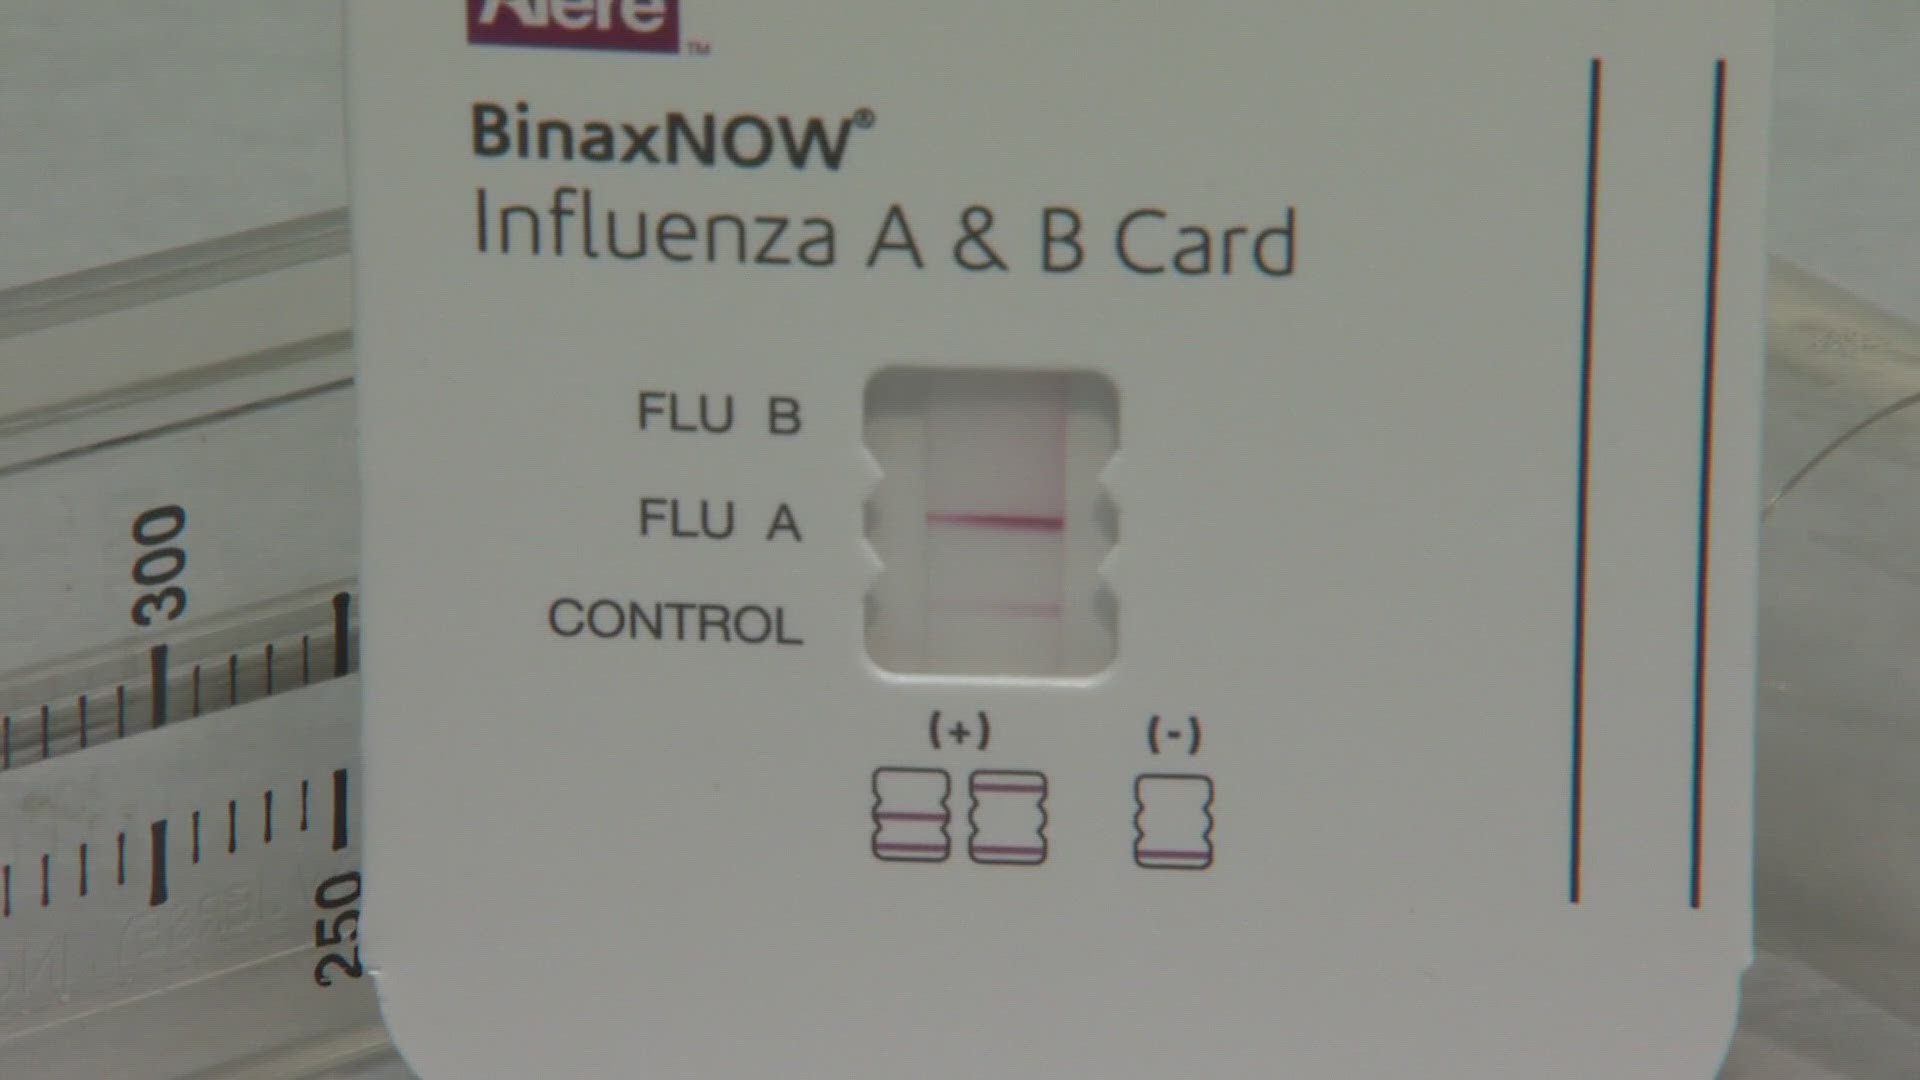 Influenza A is the most common type of flu virus. Influenza B is the second most common, but the virus mutates slowly.